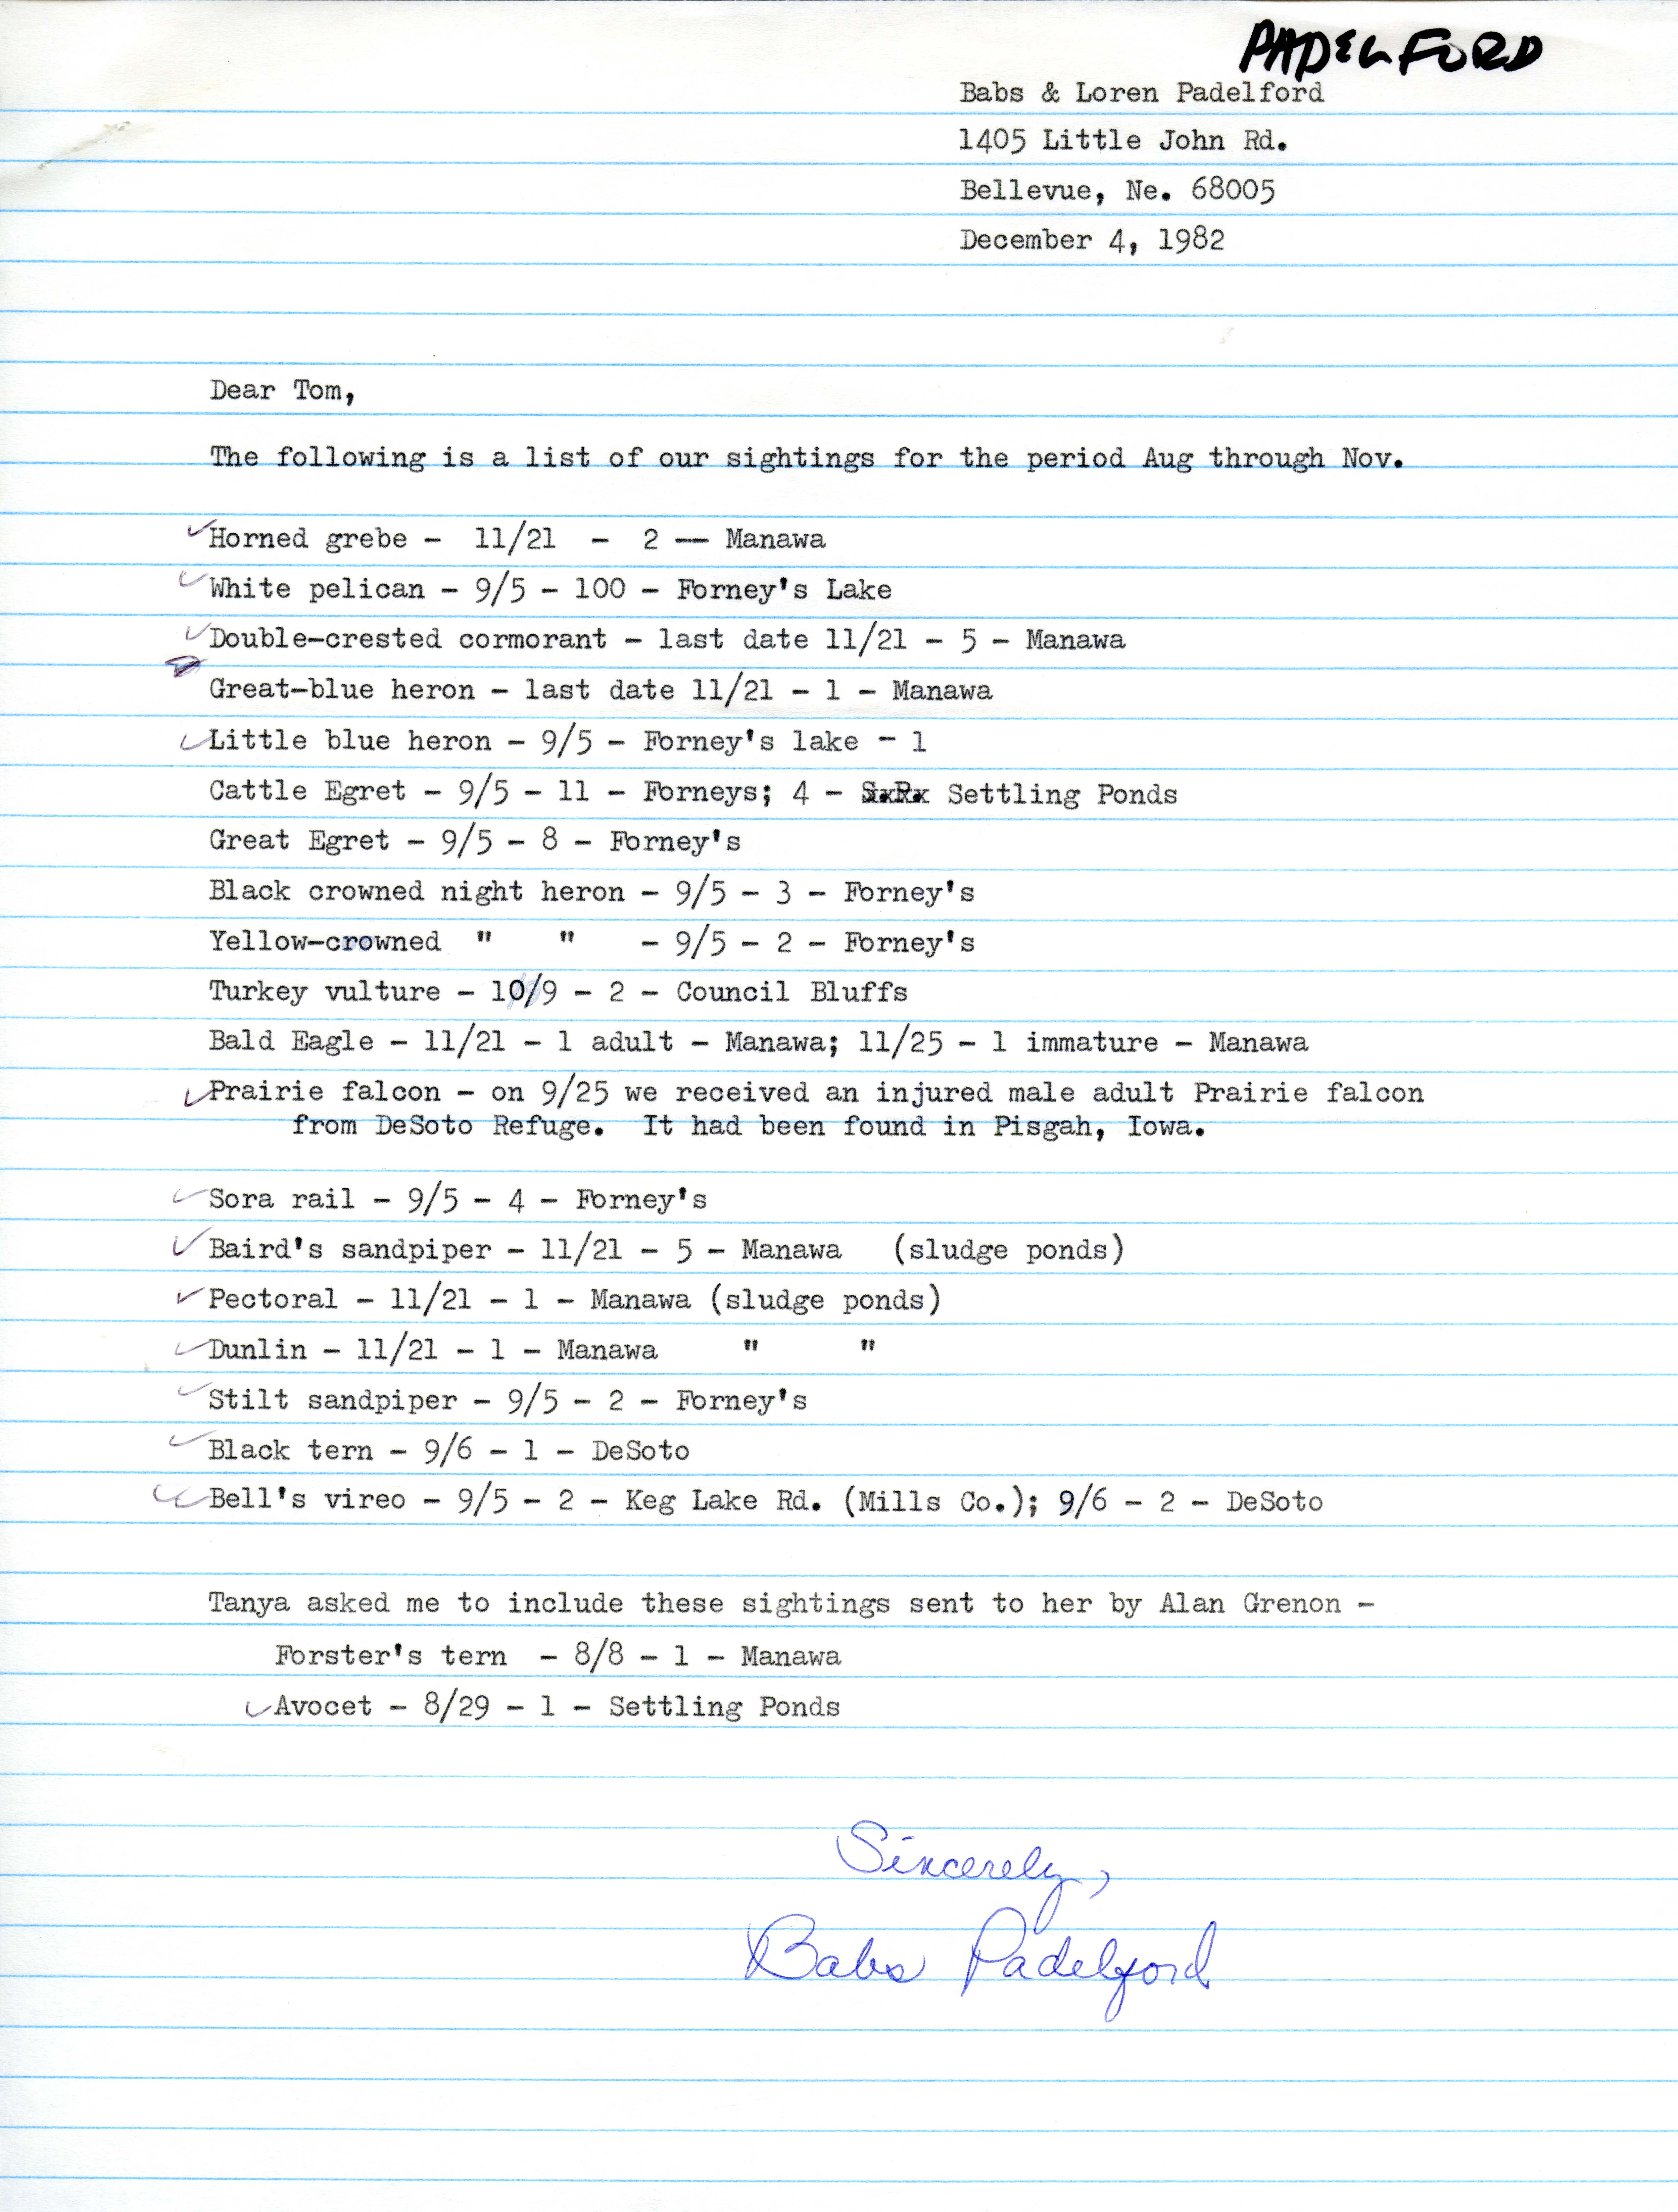 Babs Padelford letters to Thomas H. Kent regarding field notes, December 4, 1982 